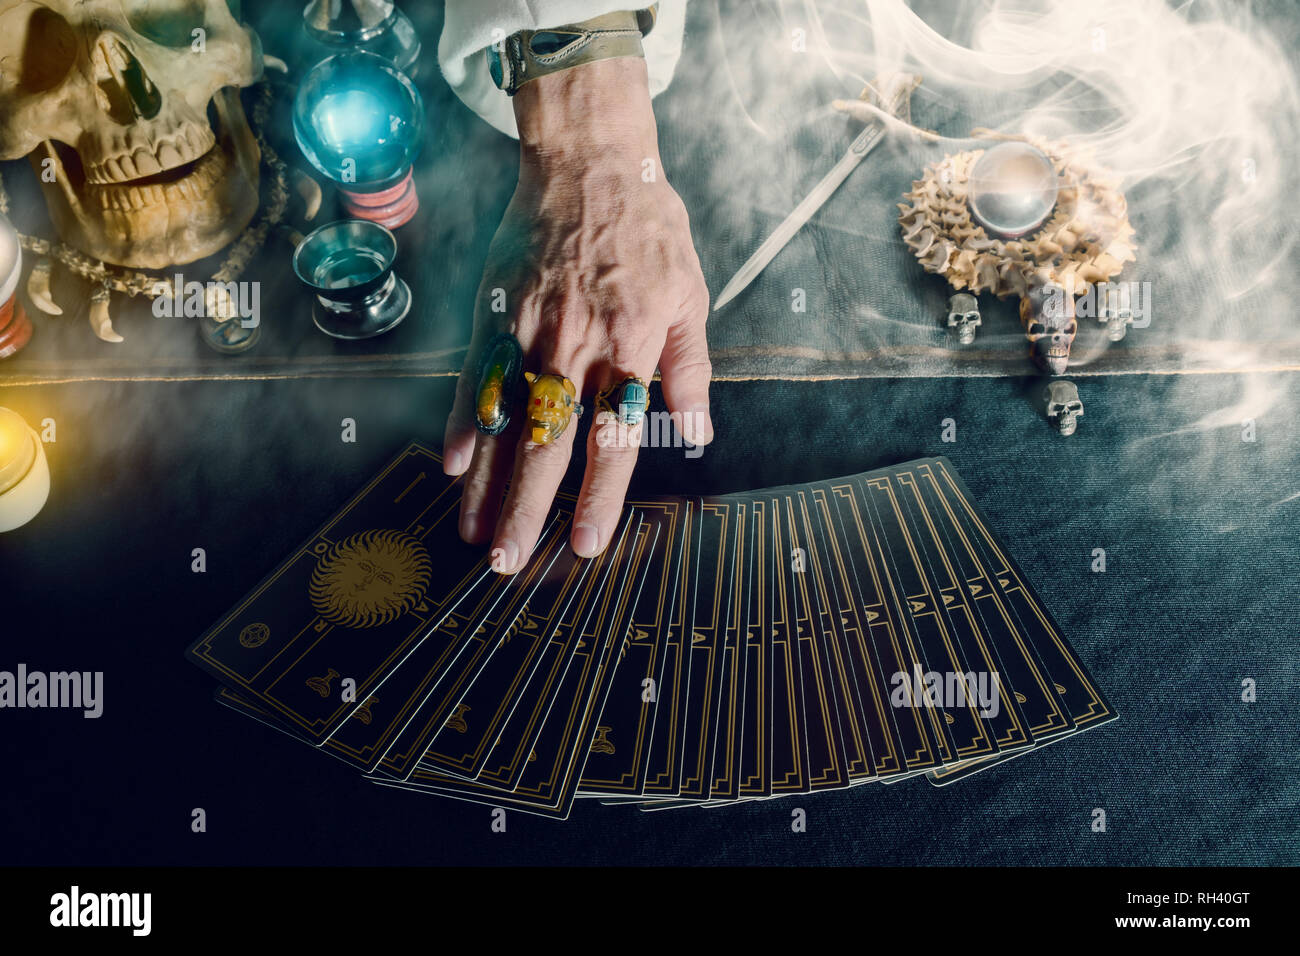 Hand of fortune teller and tarot card on the table under candlelight. Dark tone. Stock Photo